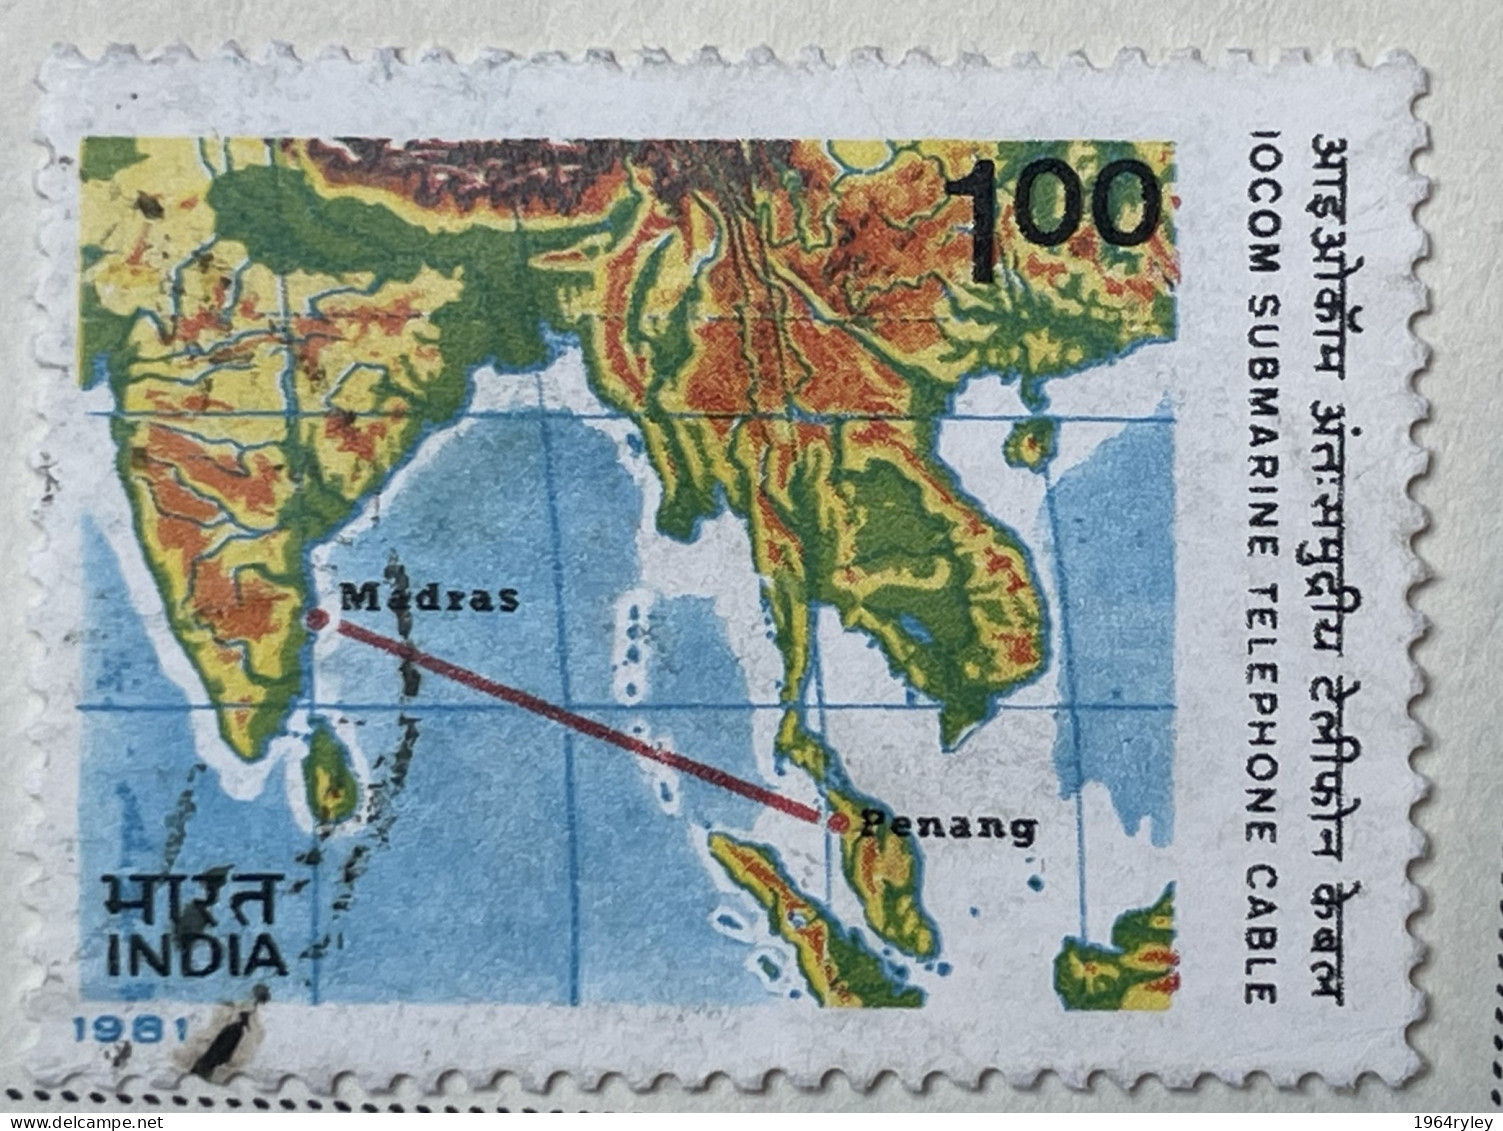 INDIA - (0) - 1981  #  948    SEE PHOTO FOR CONDITION OF STAMP(S) - Gebruikt